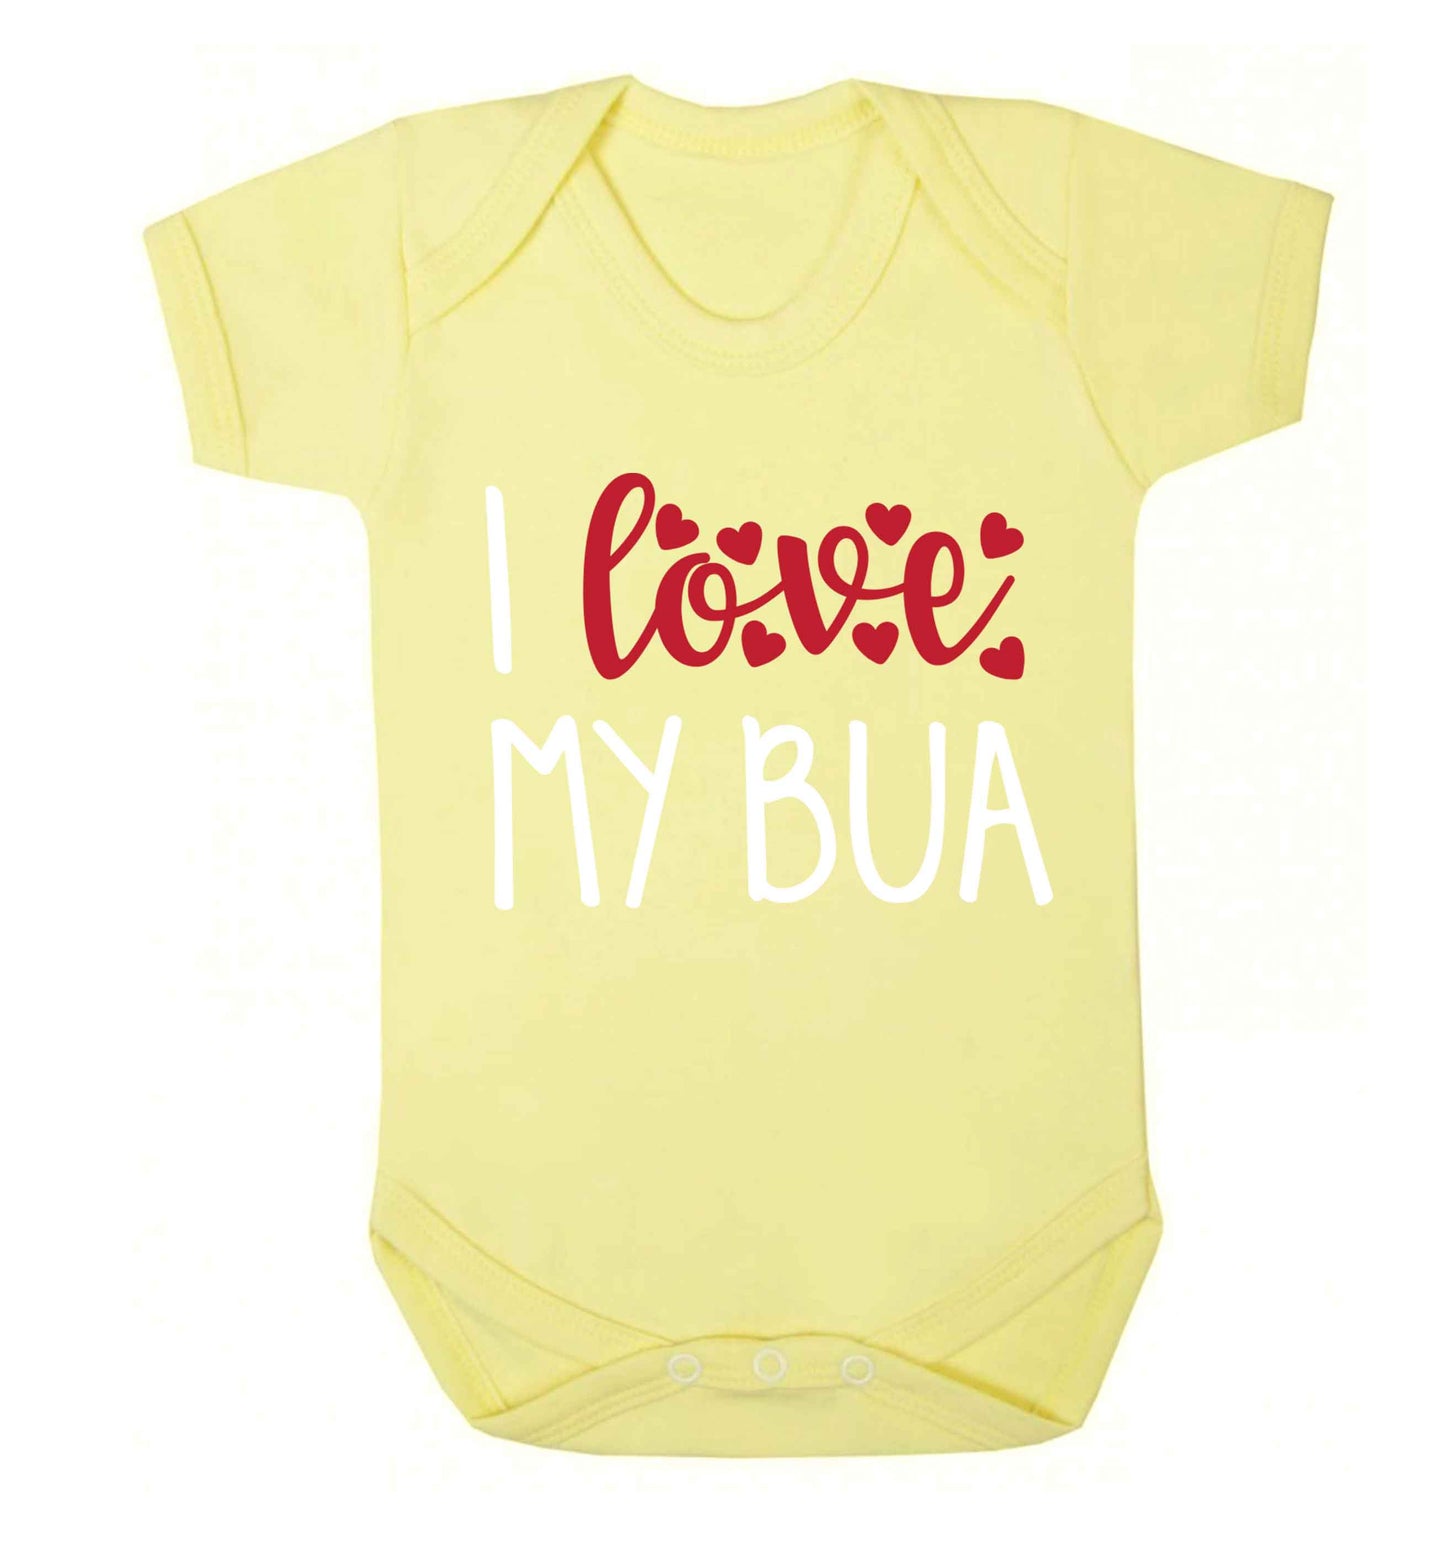 I love my bua Baby Vest pale yellow 18-24 months